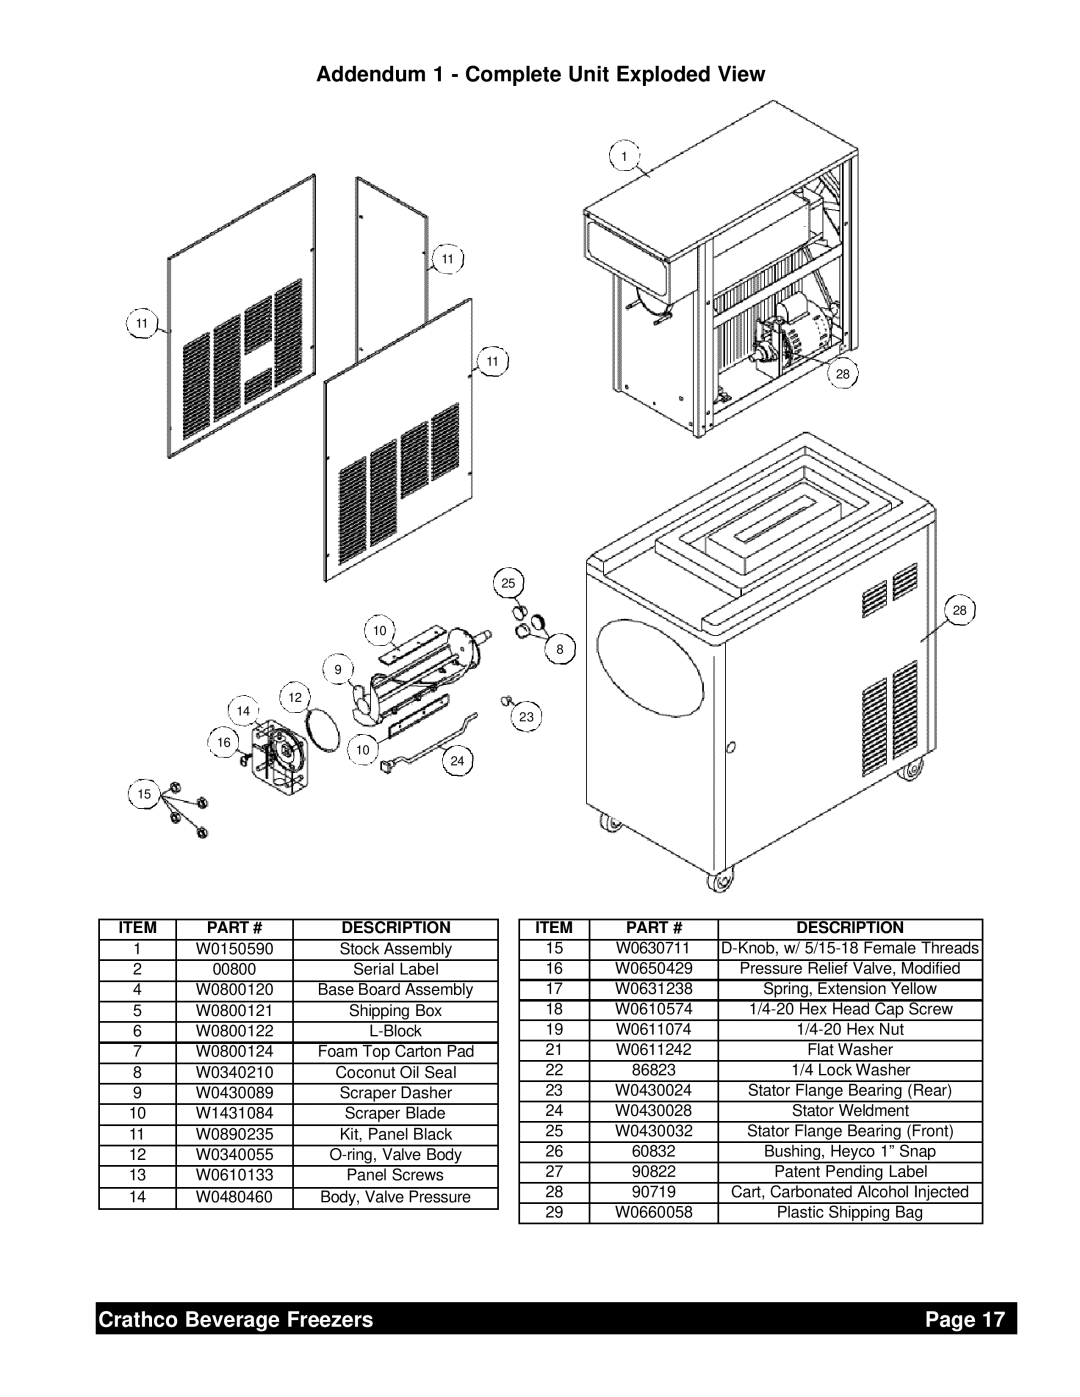 Grindmaster 6321L Addendum 1 - Complete Unit Exploded View, Crathco Beverage Freezers, Page, Coconut Oil Seal 